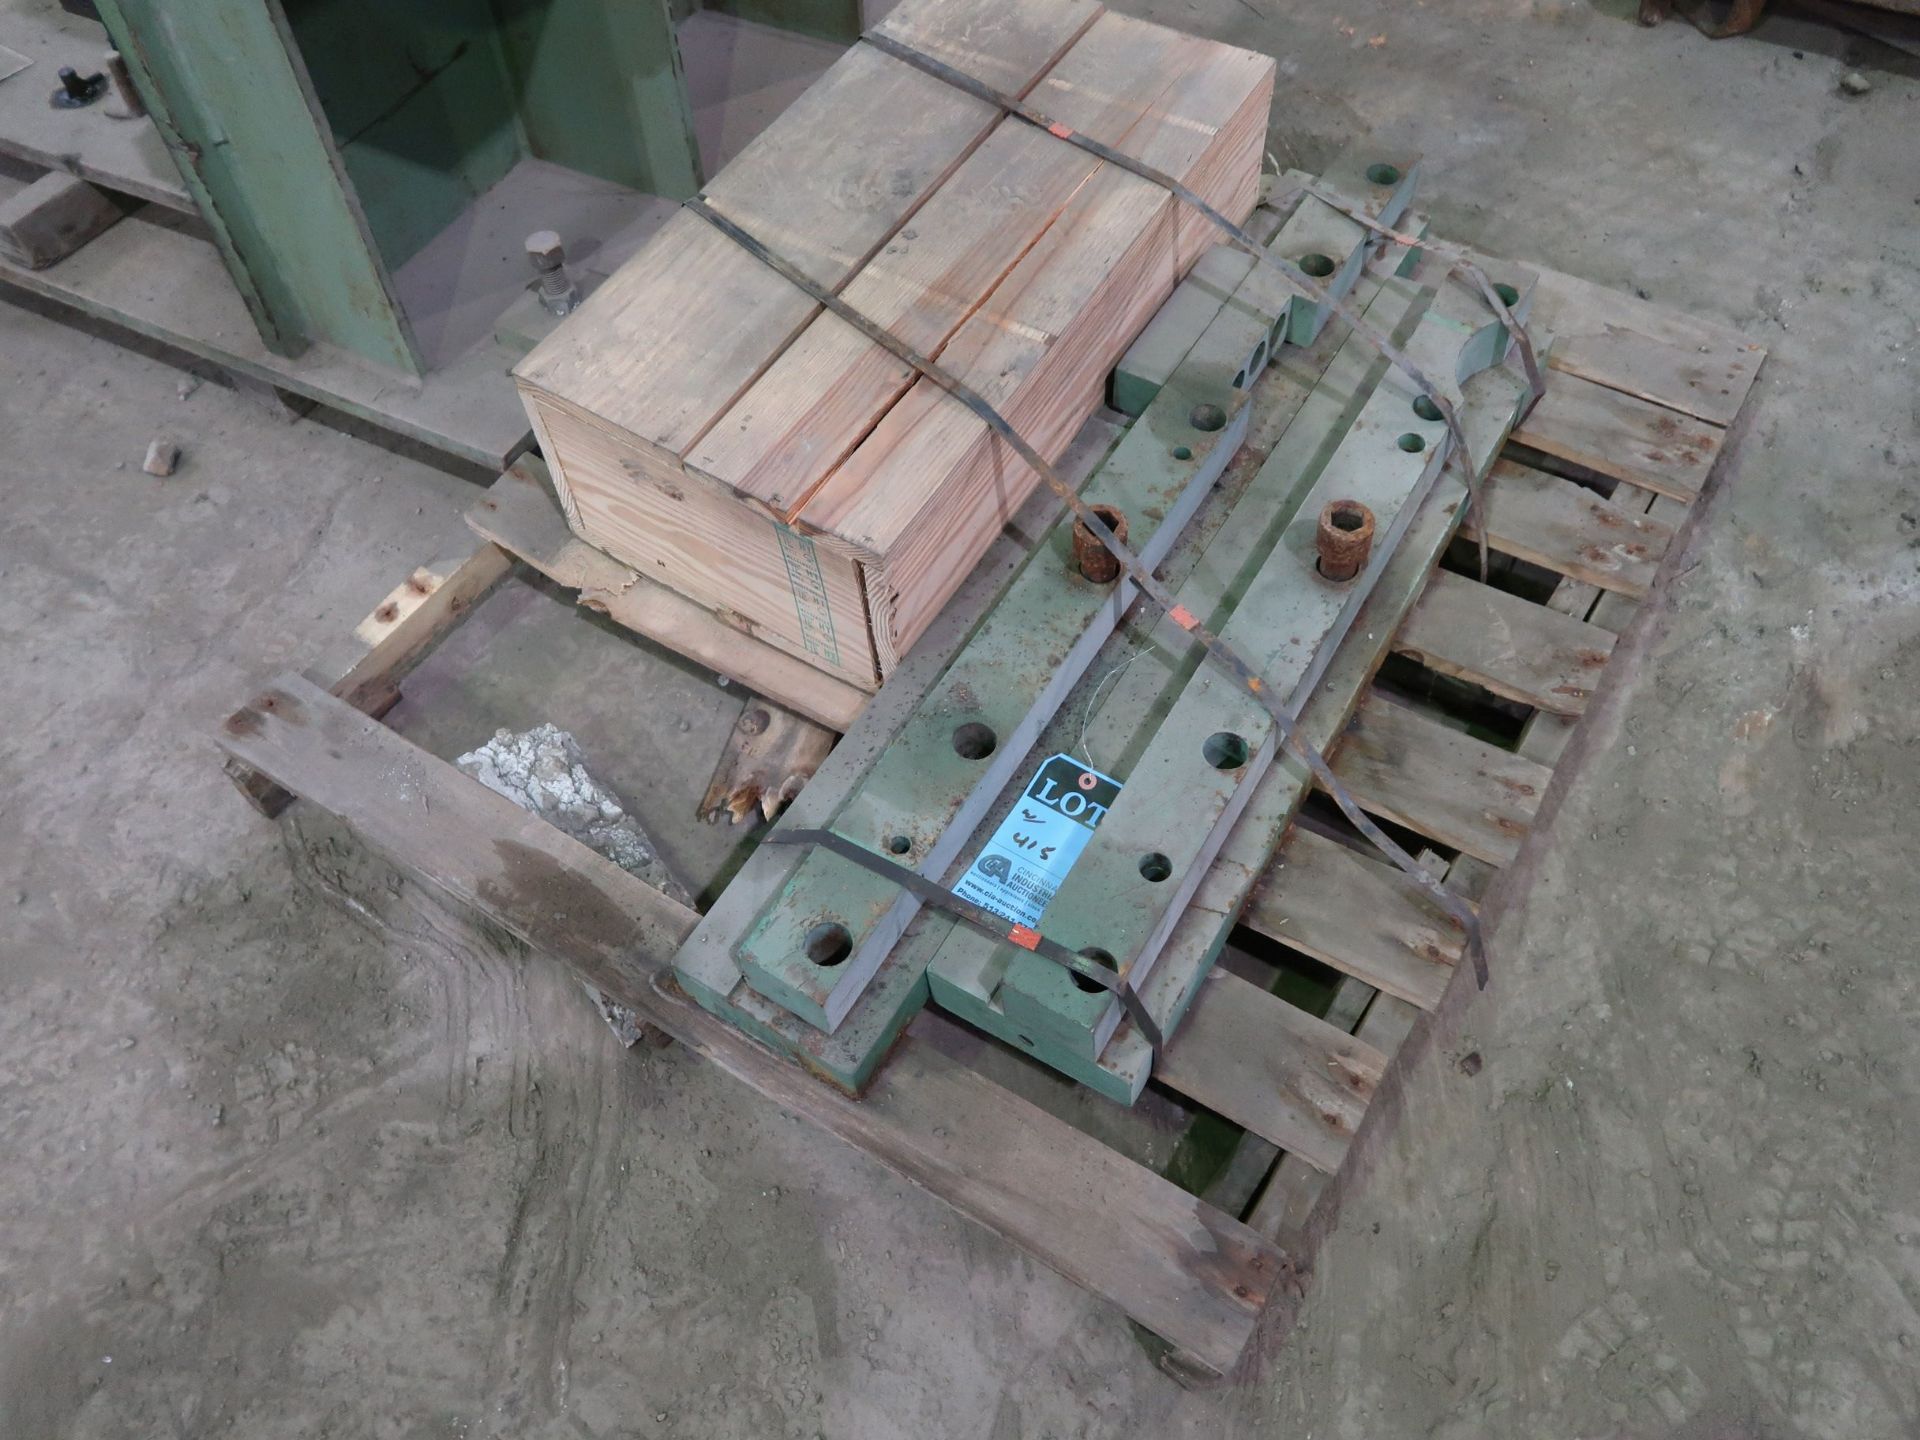 STEINER MODEL RIP20080 HYDRAULIC PLATE STRAIGHTENING PRESS; S/N 558, 59" FOR BED, 20" STROKE, WITH - Image 12 of 12